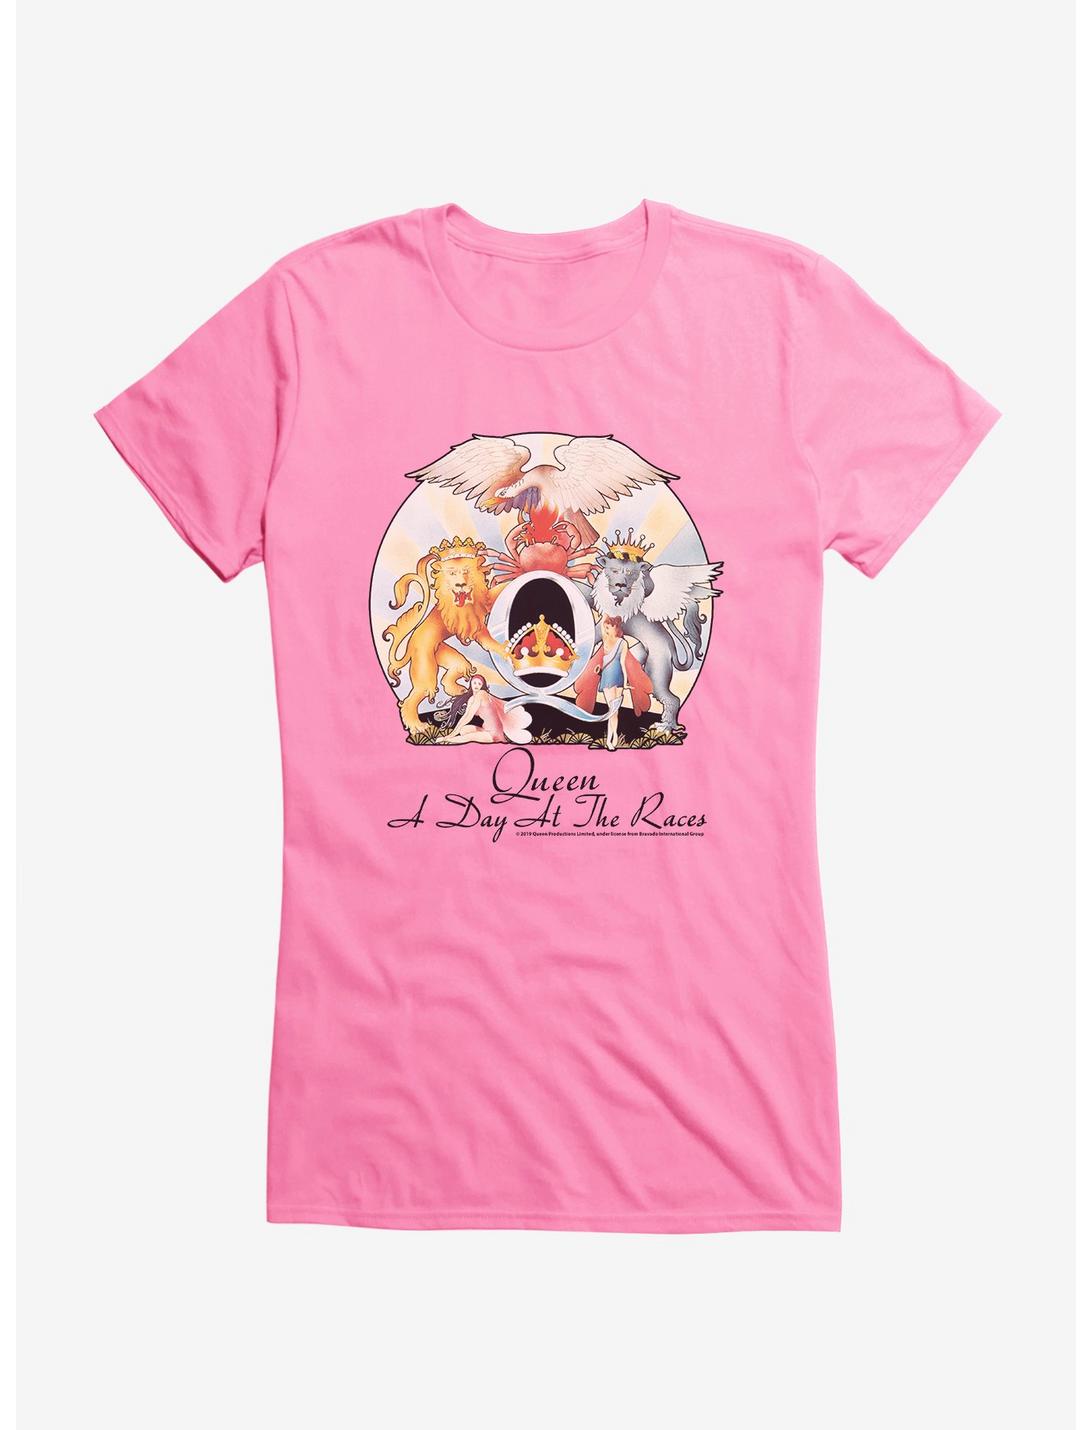 Queen A Day At The Races Girls T-Shirt, CHARITY PINK, hi-res